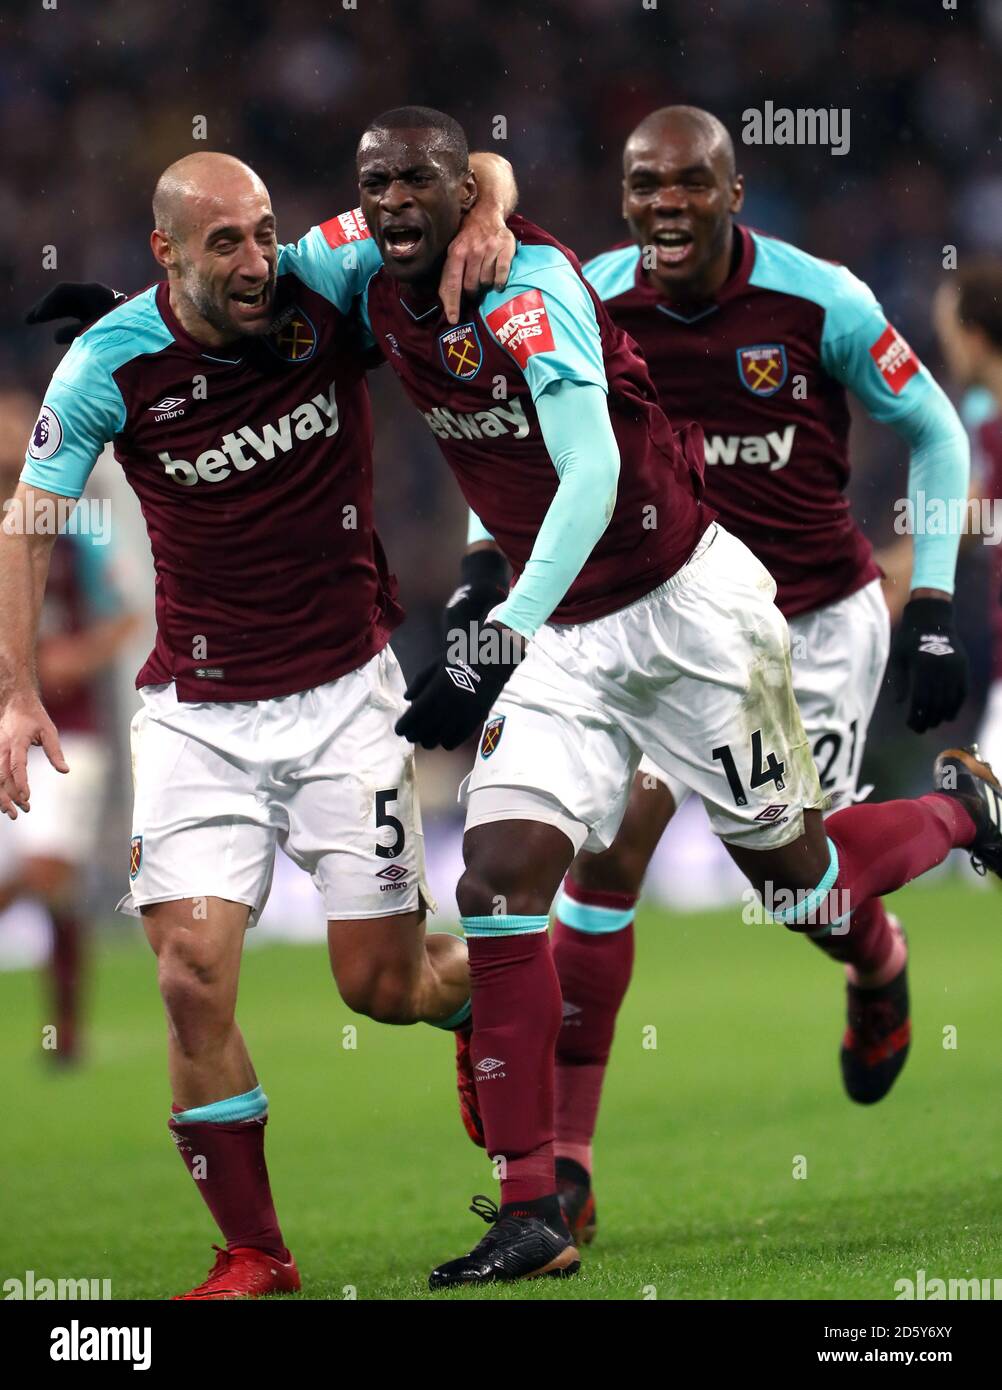 West Ham United's Pedro Obiang celebrates scoring his side's first goal of the game with Pablo Zabaleta (left) and Cheikhou Kouyate (right) Stock Photo